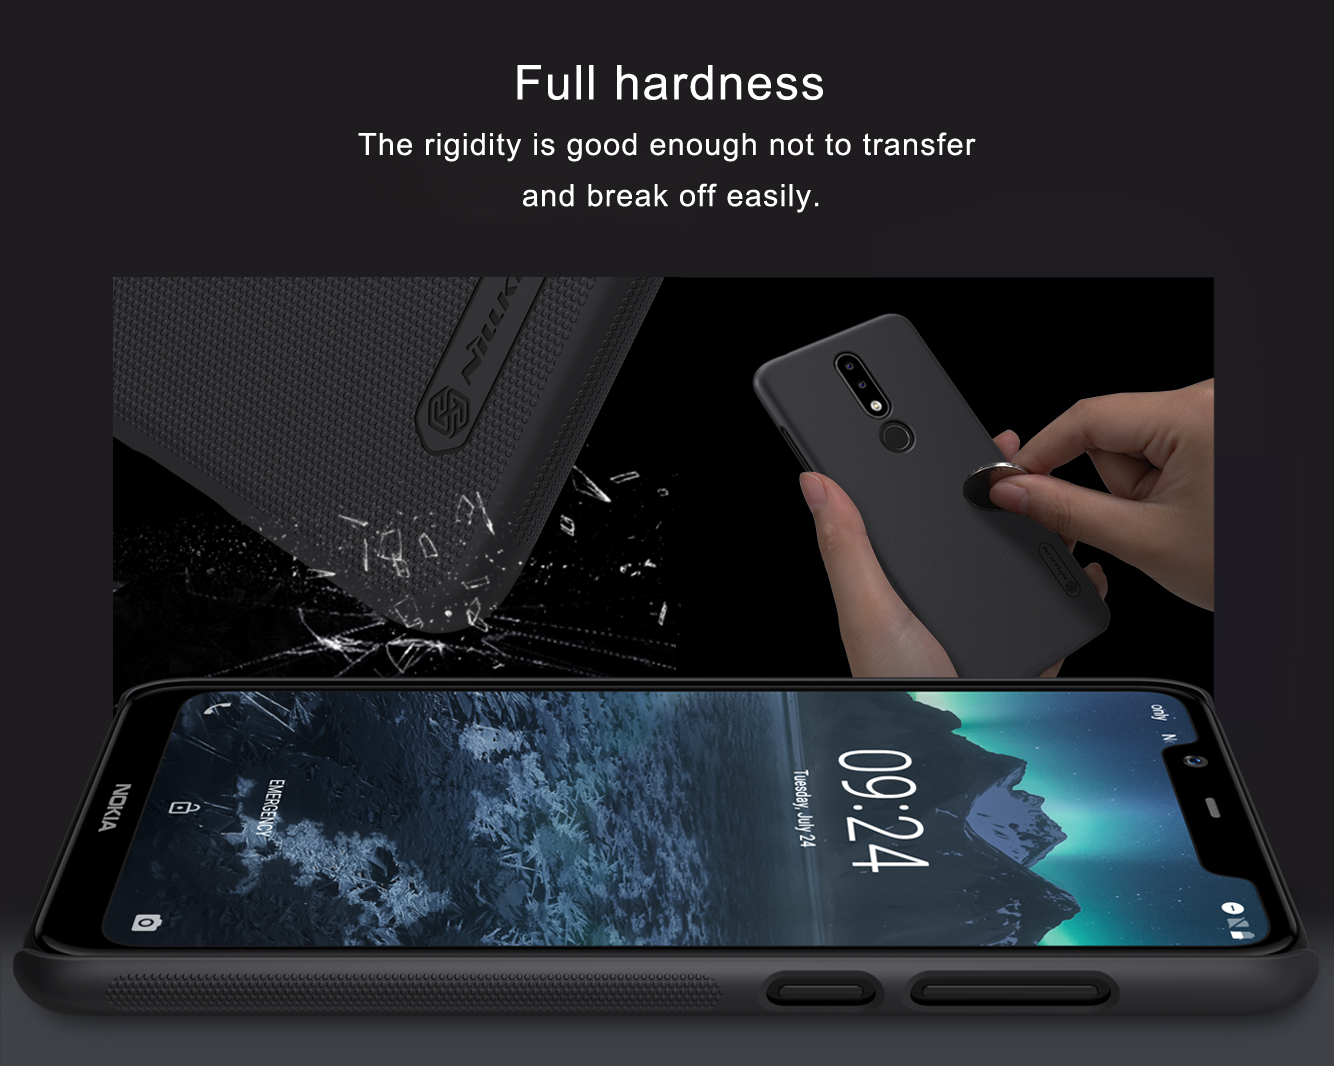 Nillkin Super Frosted Shield Matte cover case for Nokia 5.1 Plus (Nokia X5)